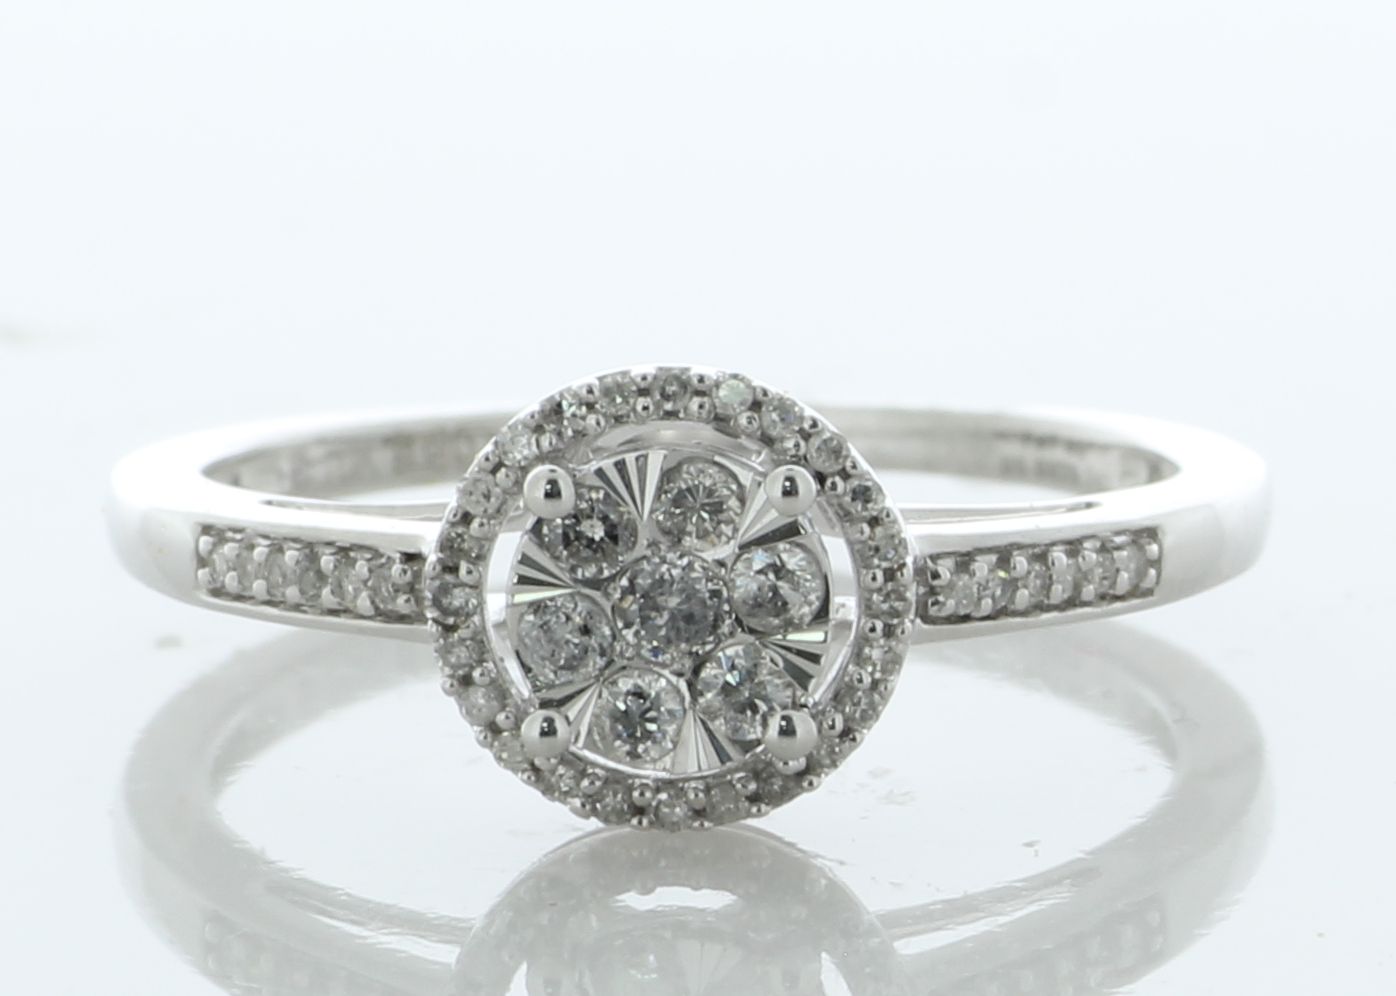 10ct White Gold Round Cluster Diamond Ring 0.25 Carats - Image 3 of 6